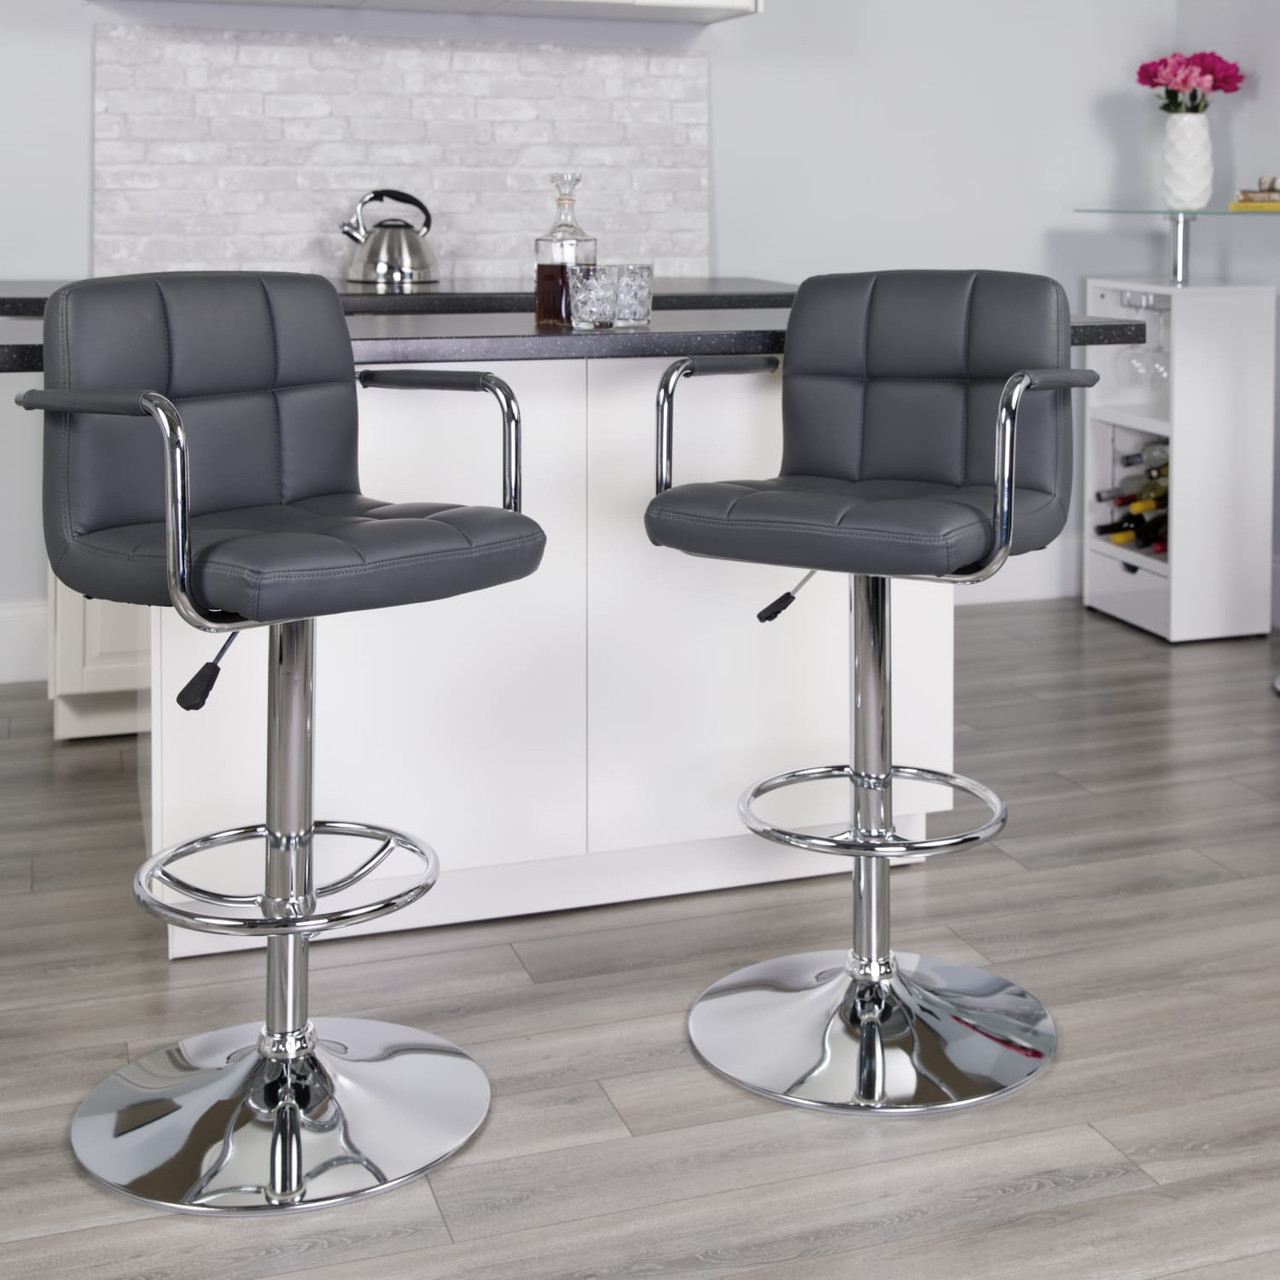 2 Pk. Contemporary Gray Quilted Vinyl Adjustable Height Barstool with Arms and Chrome Base